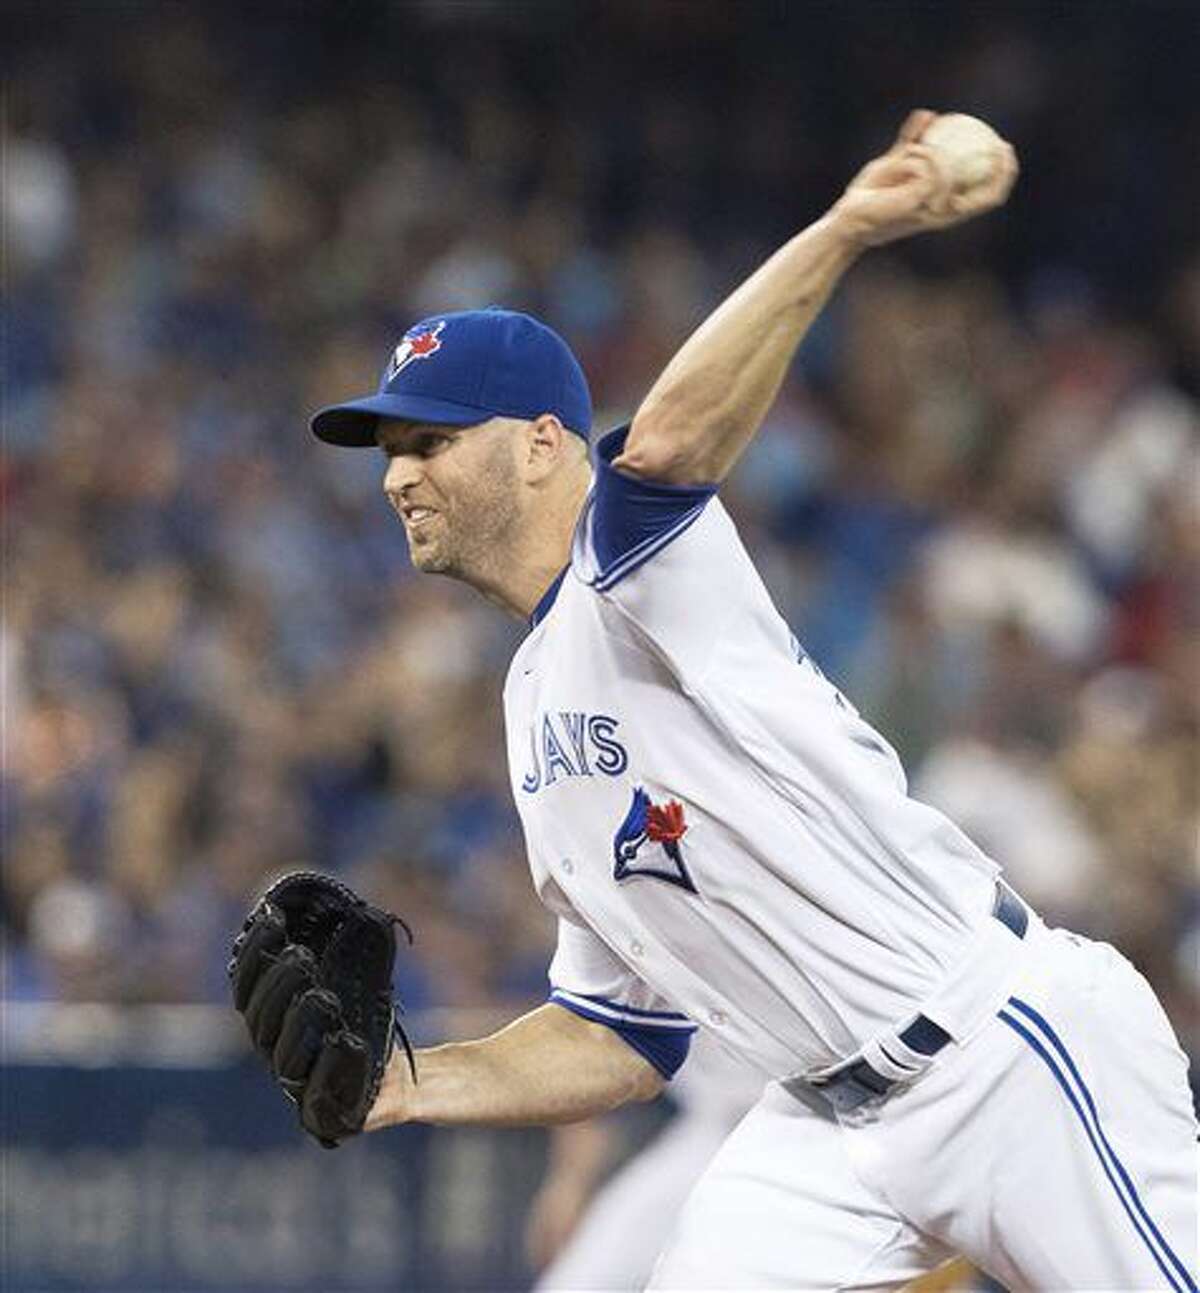 Toronto Blue Jays starting pitcher J.A. Happ throws against the Detroit Tigers during the first inning of a baseball game in Toronto, Friday July 8, 2016. (Fred Thornhill/The Canadian Press via AP)